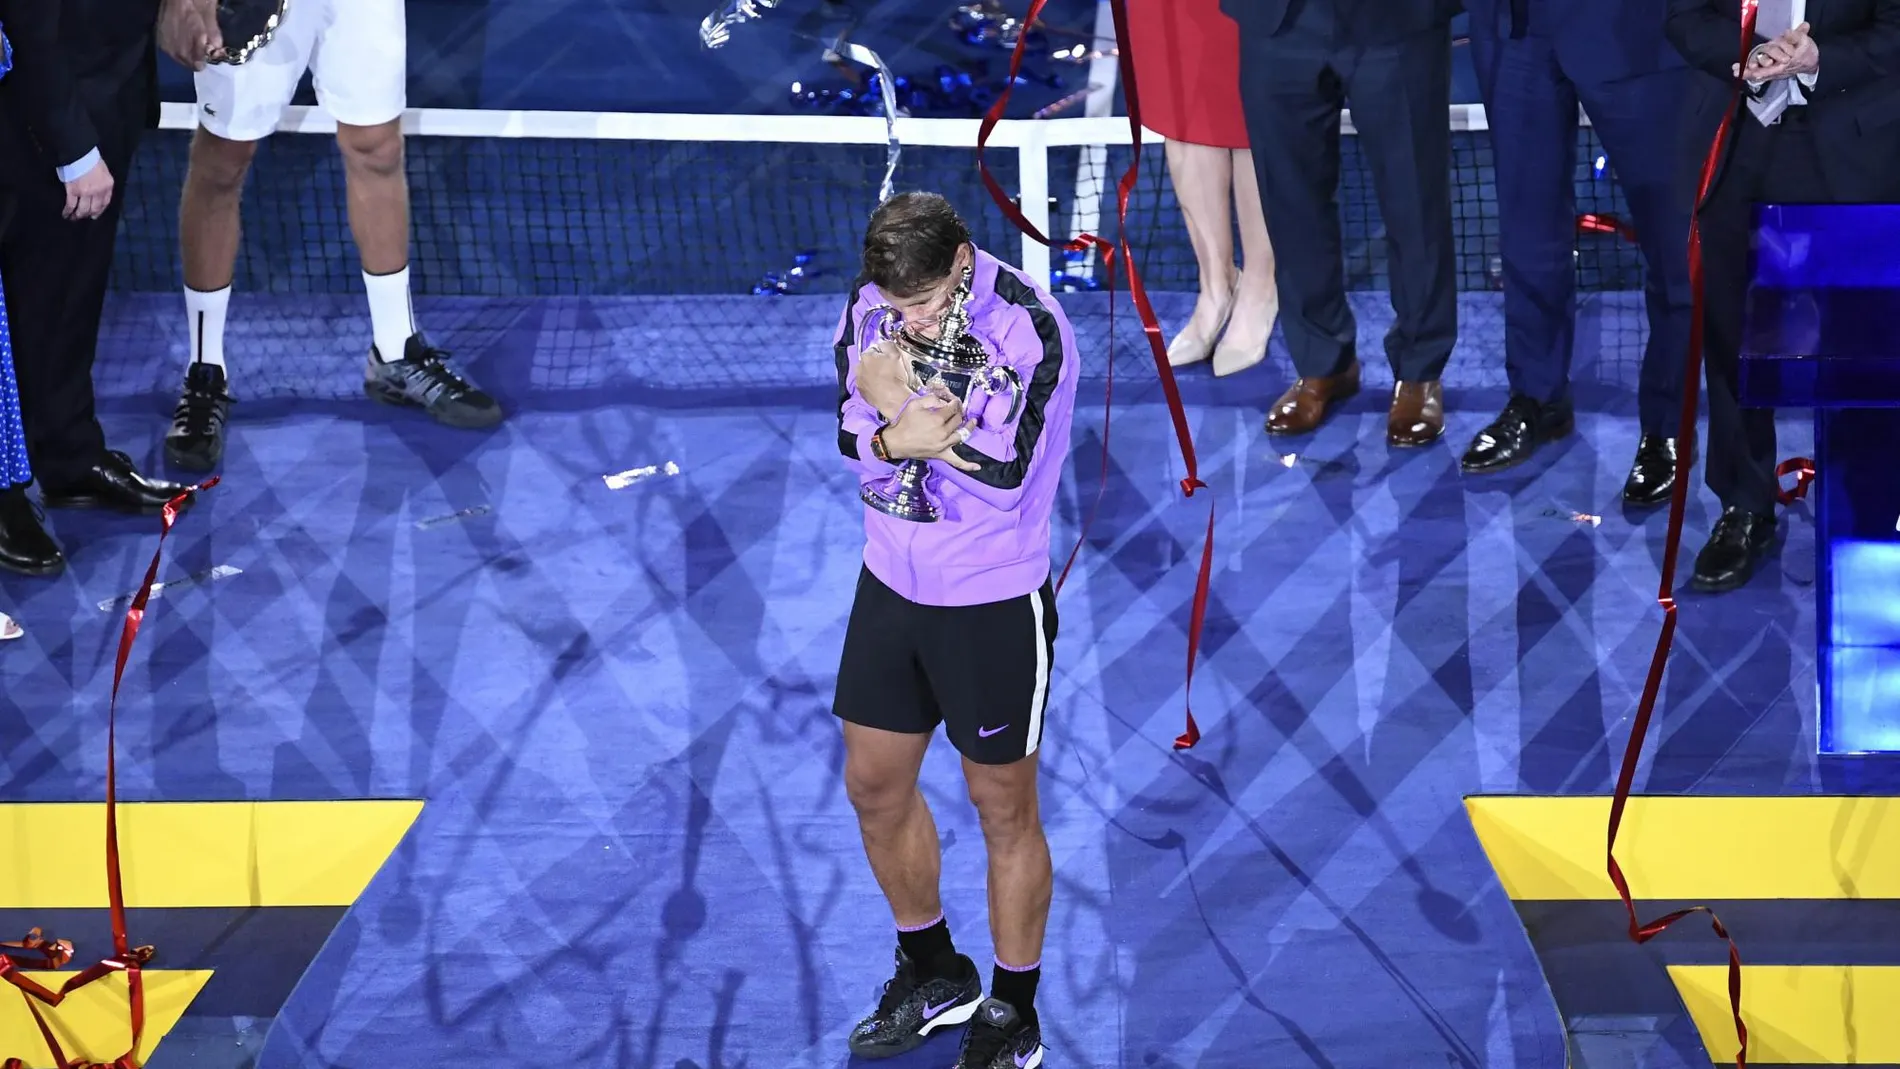 [Sep 8, 2019; Flushing, NY, USA; Rafael Nadal of Spain poses with the championship trophy after]